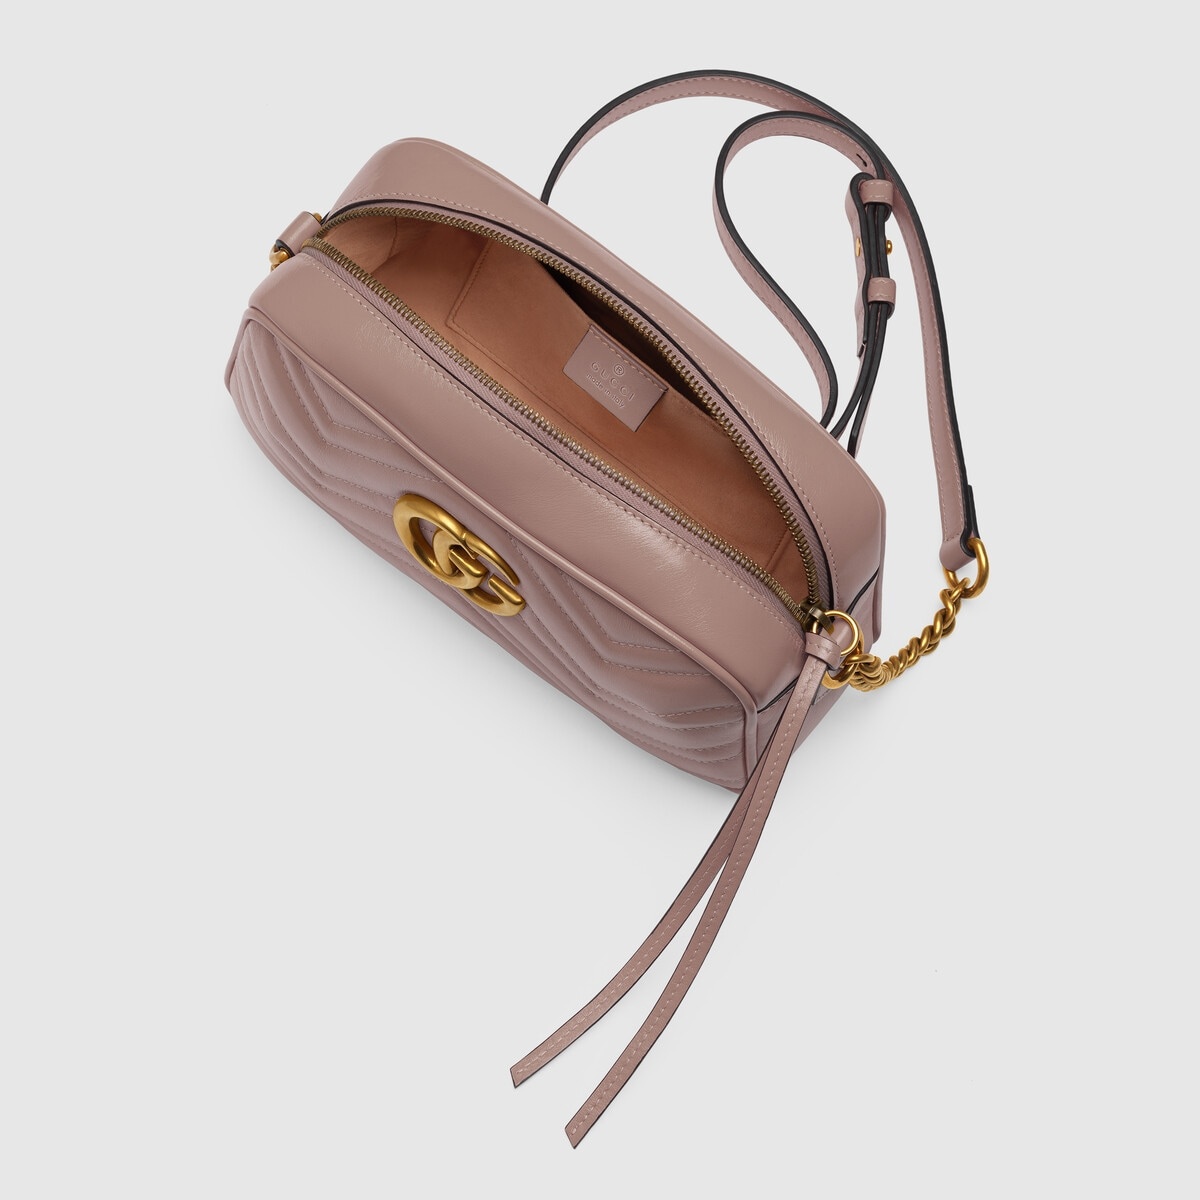 GG Marmont small shoulder bag - 9